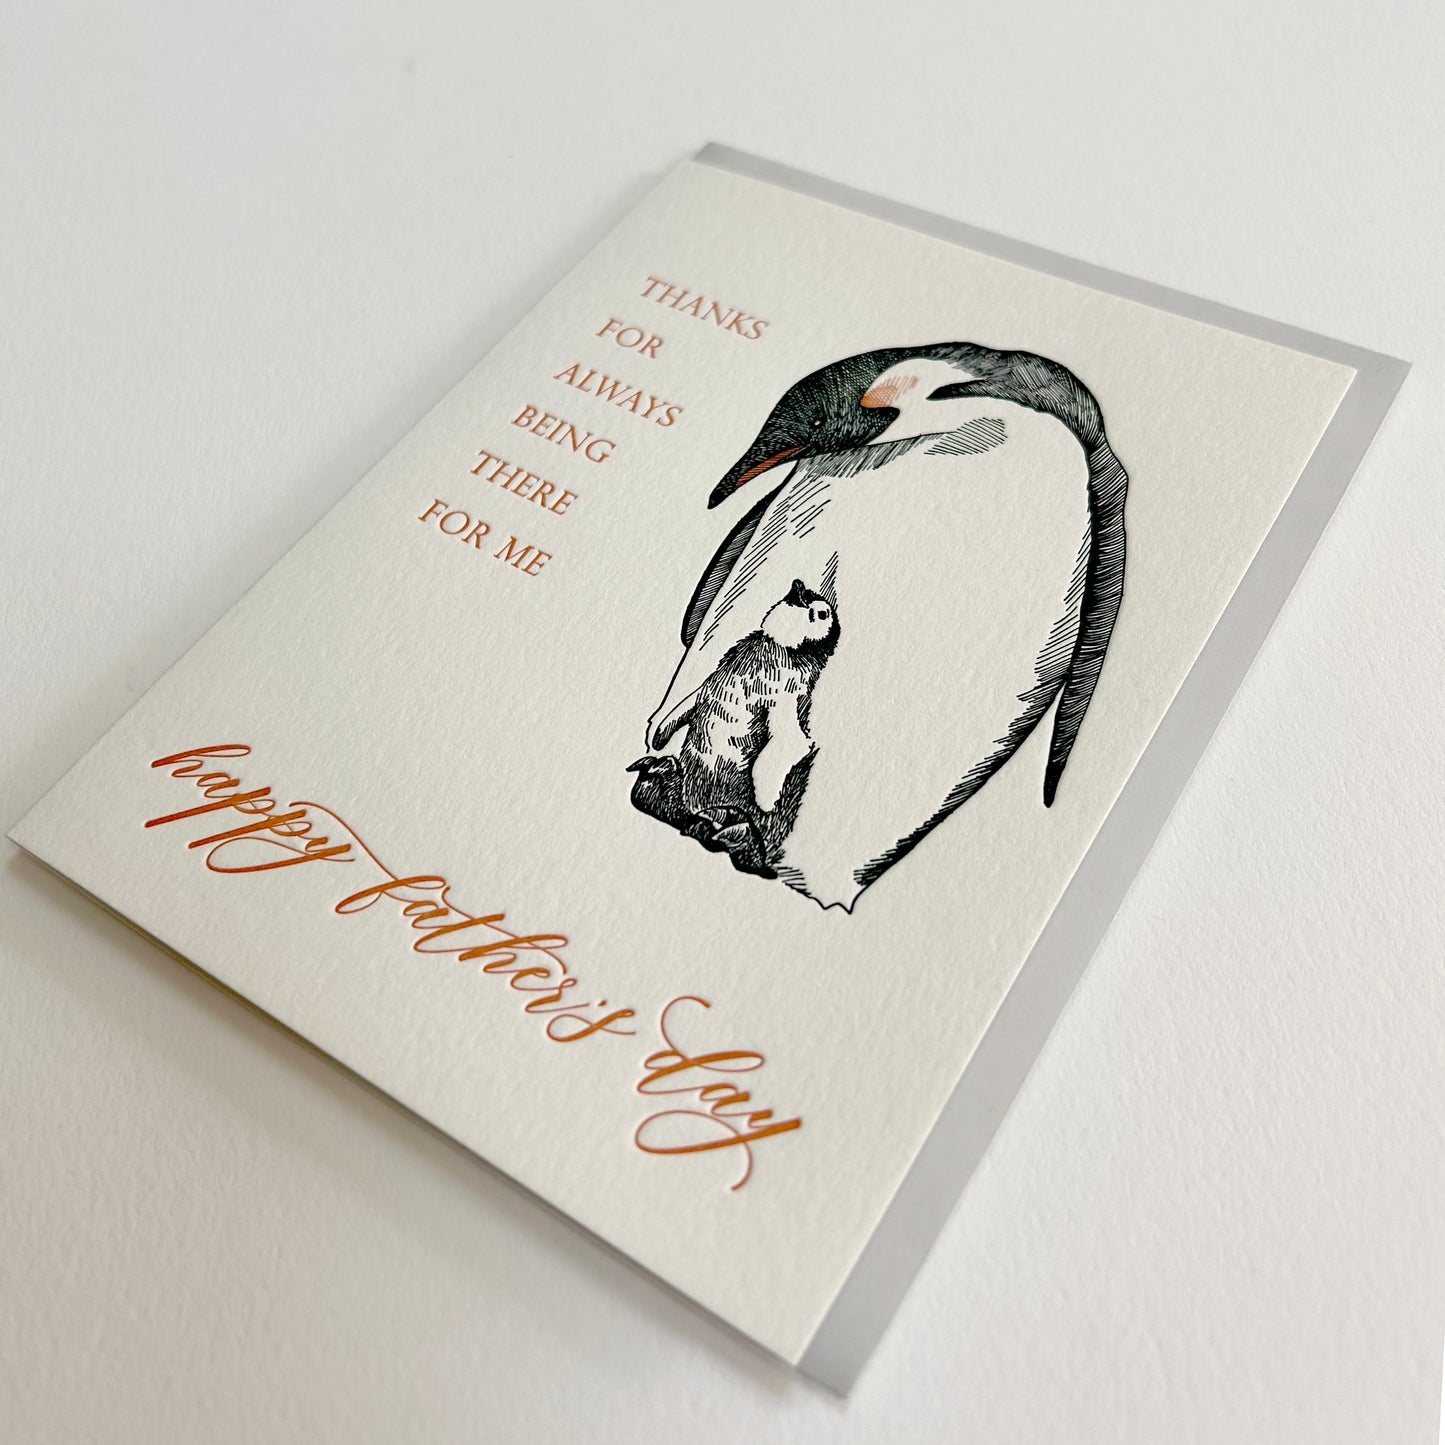 Thanks For Always Being There For Me Happy Father's Day Letterpress Greeting Card